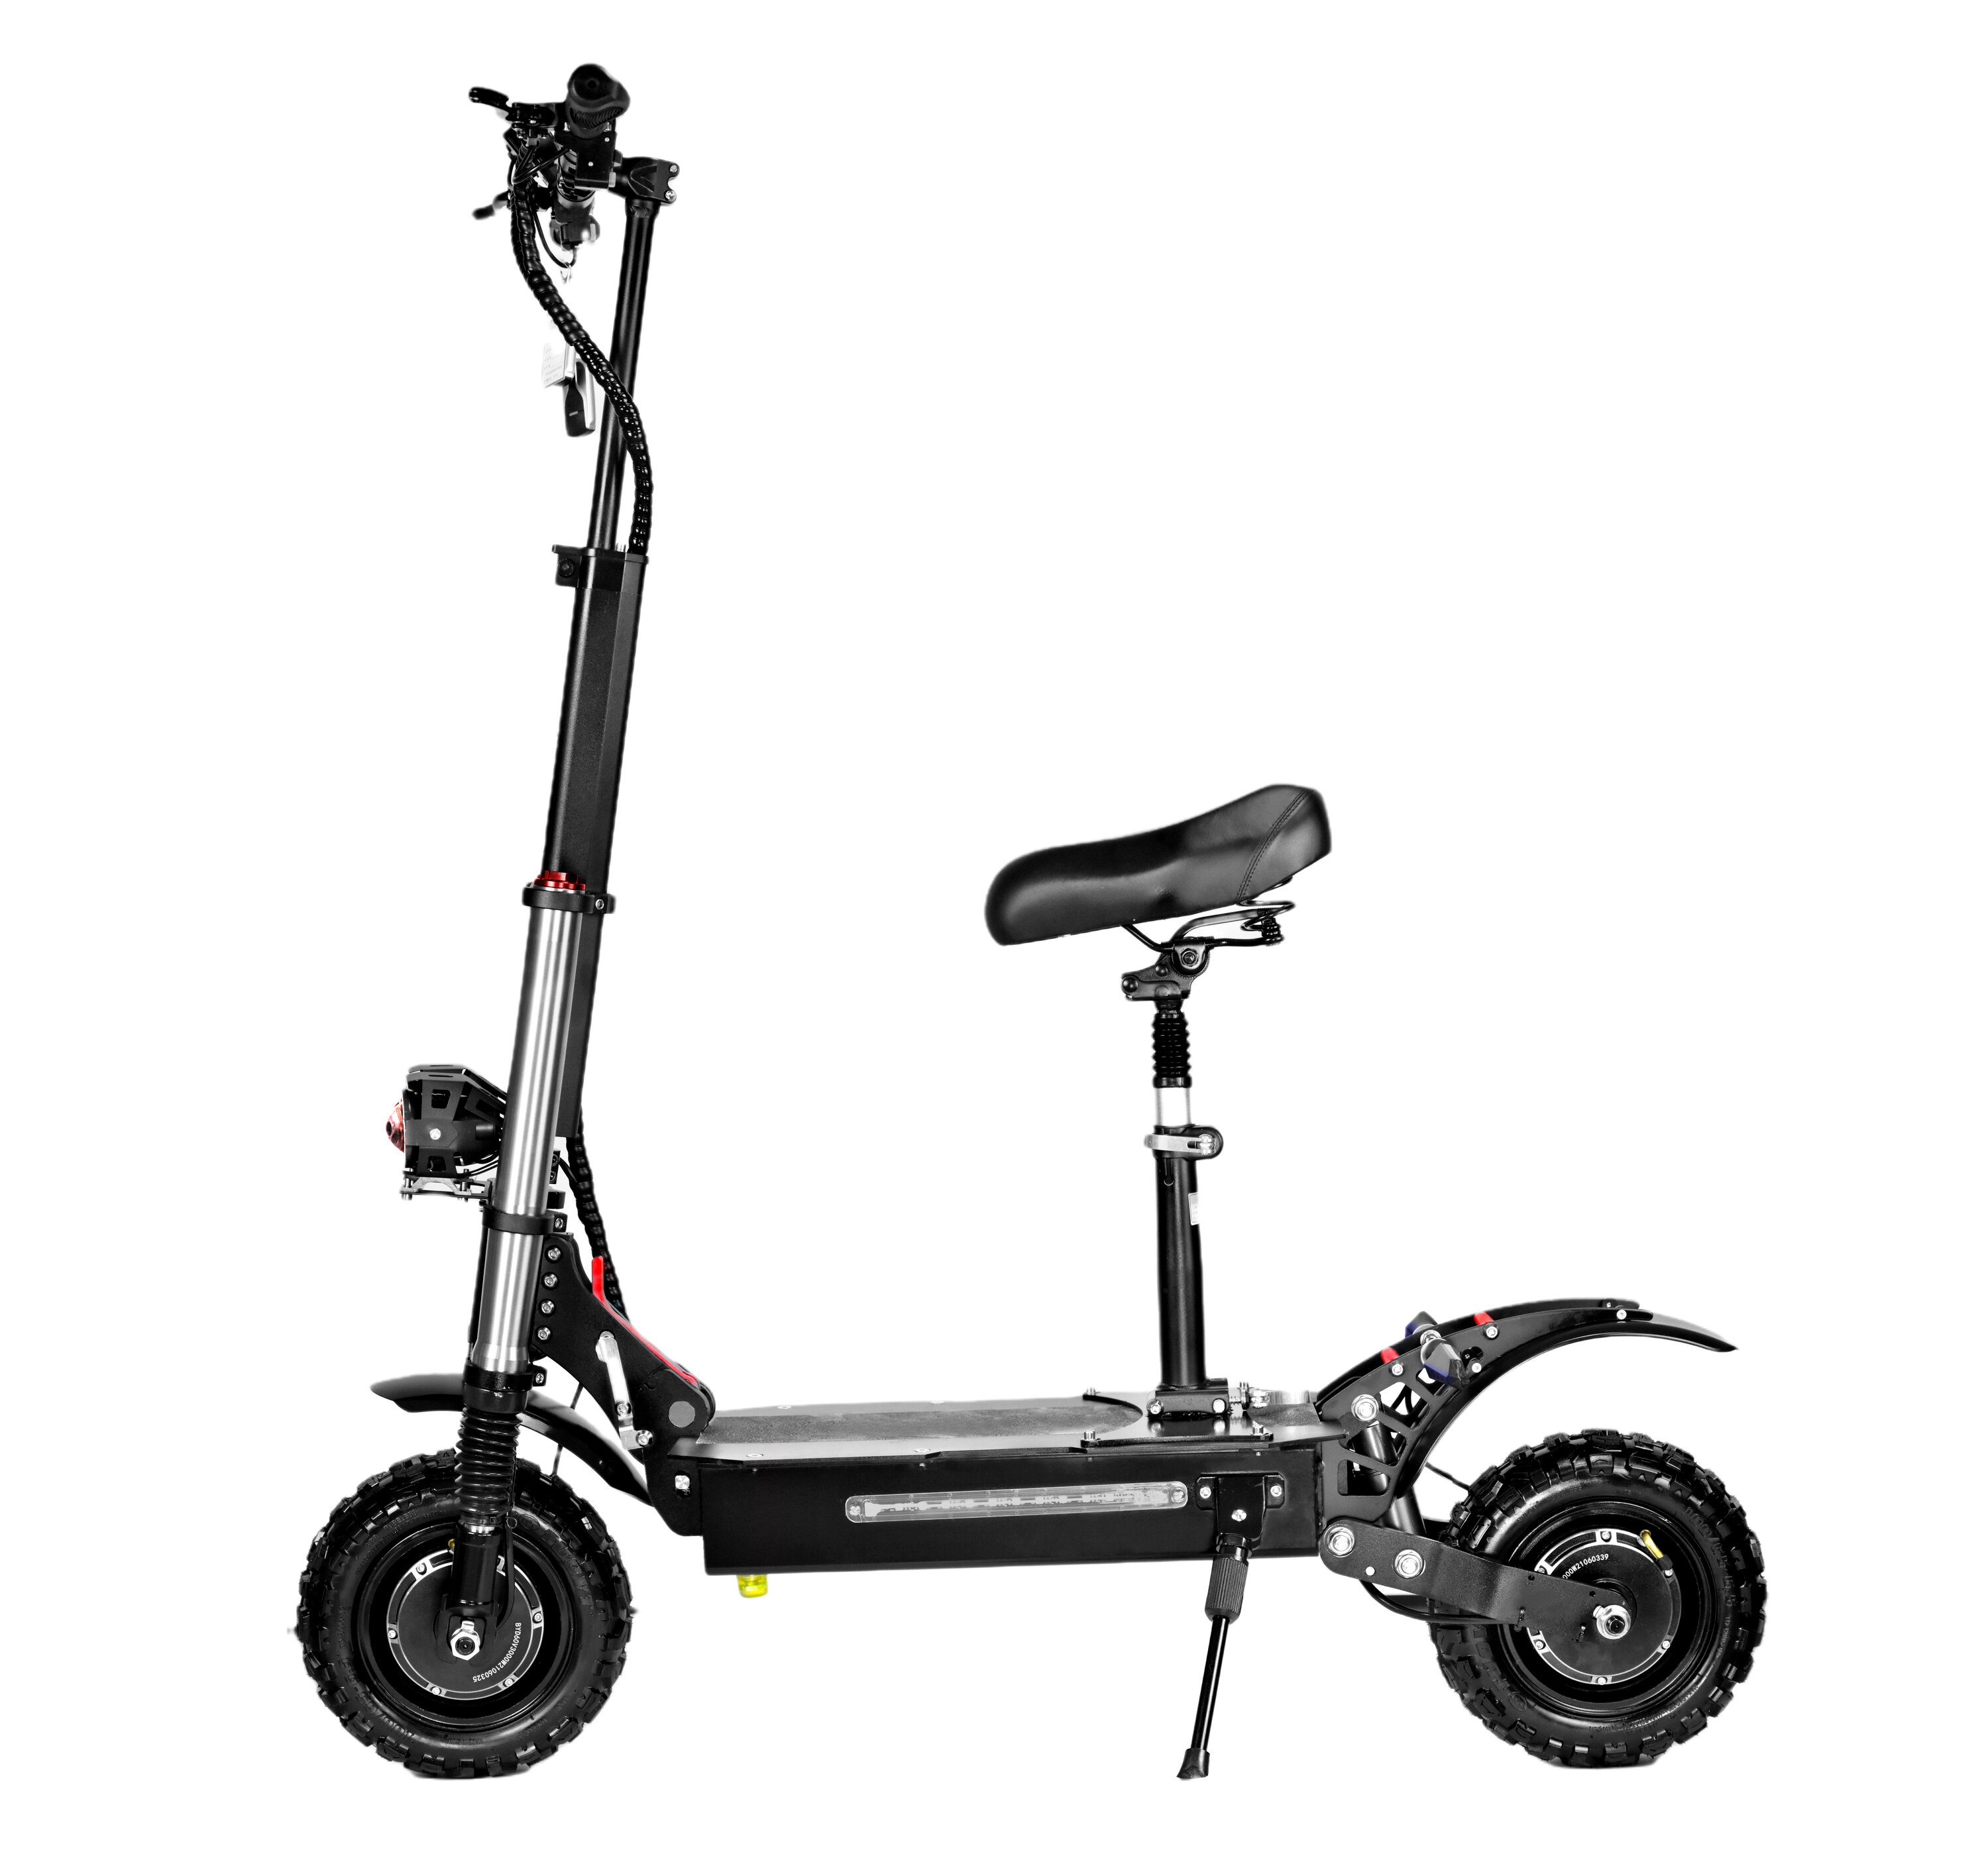 best price,boyueda,s3,11,38ah,6000w,60v,oil,brake,11,inch,electric,scooter,eu,coupon,price,discount